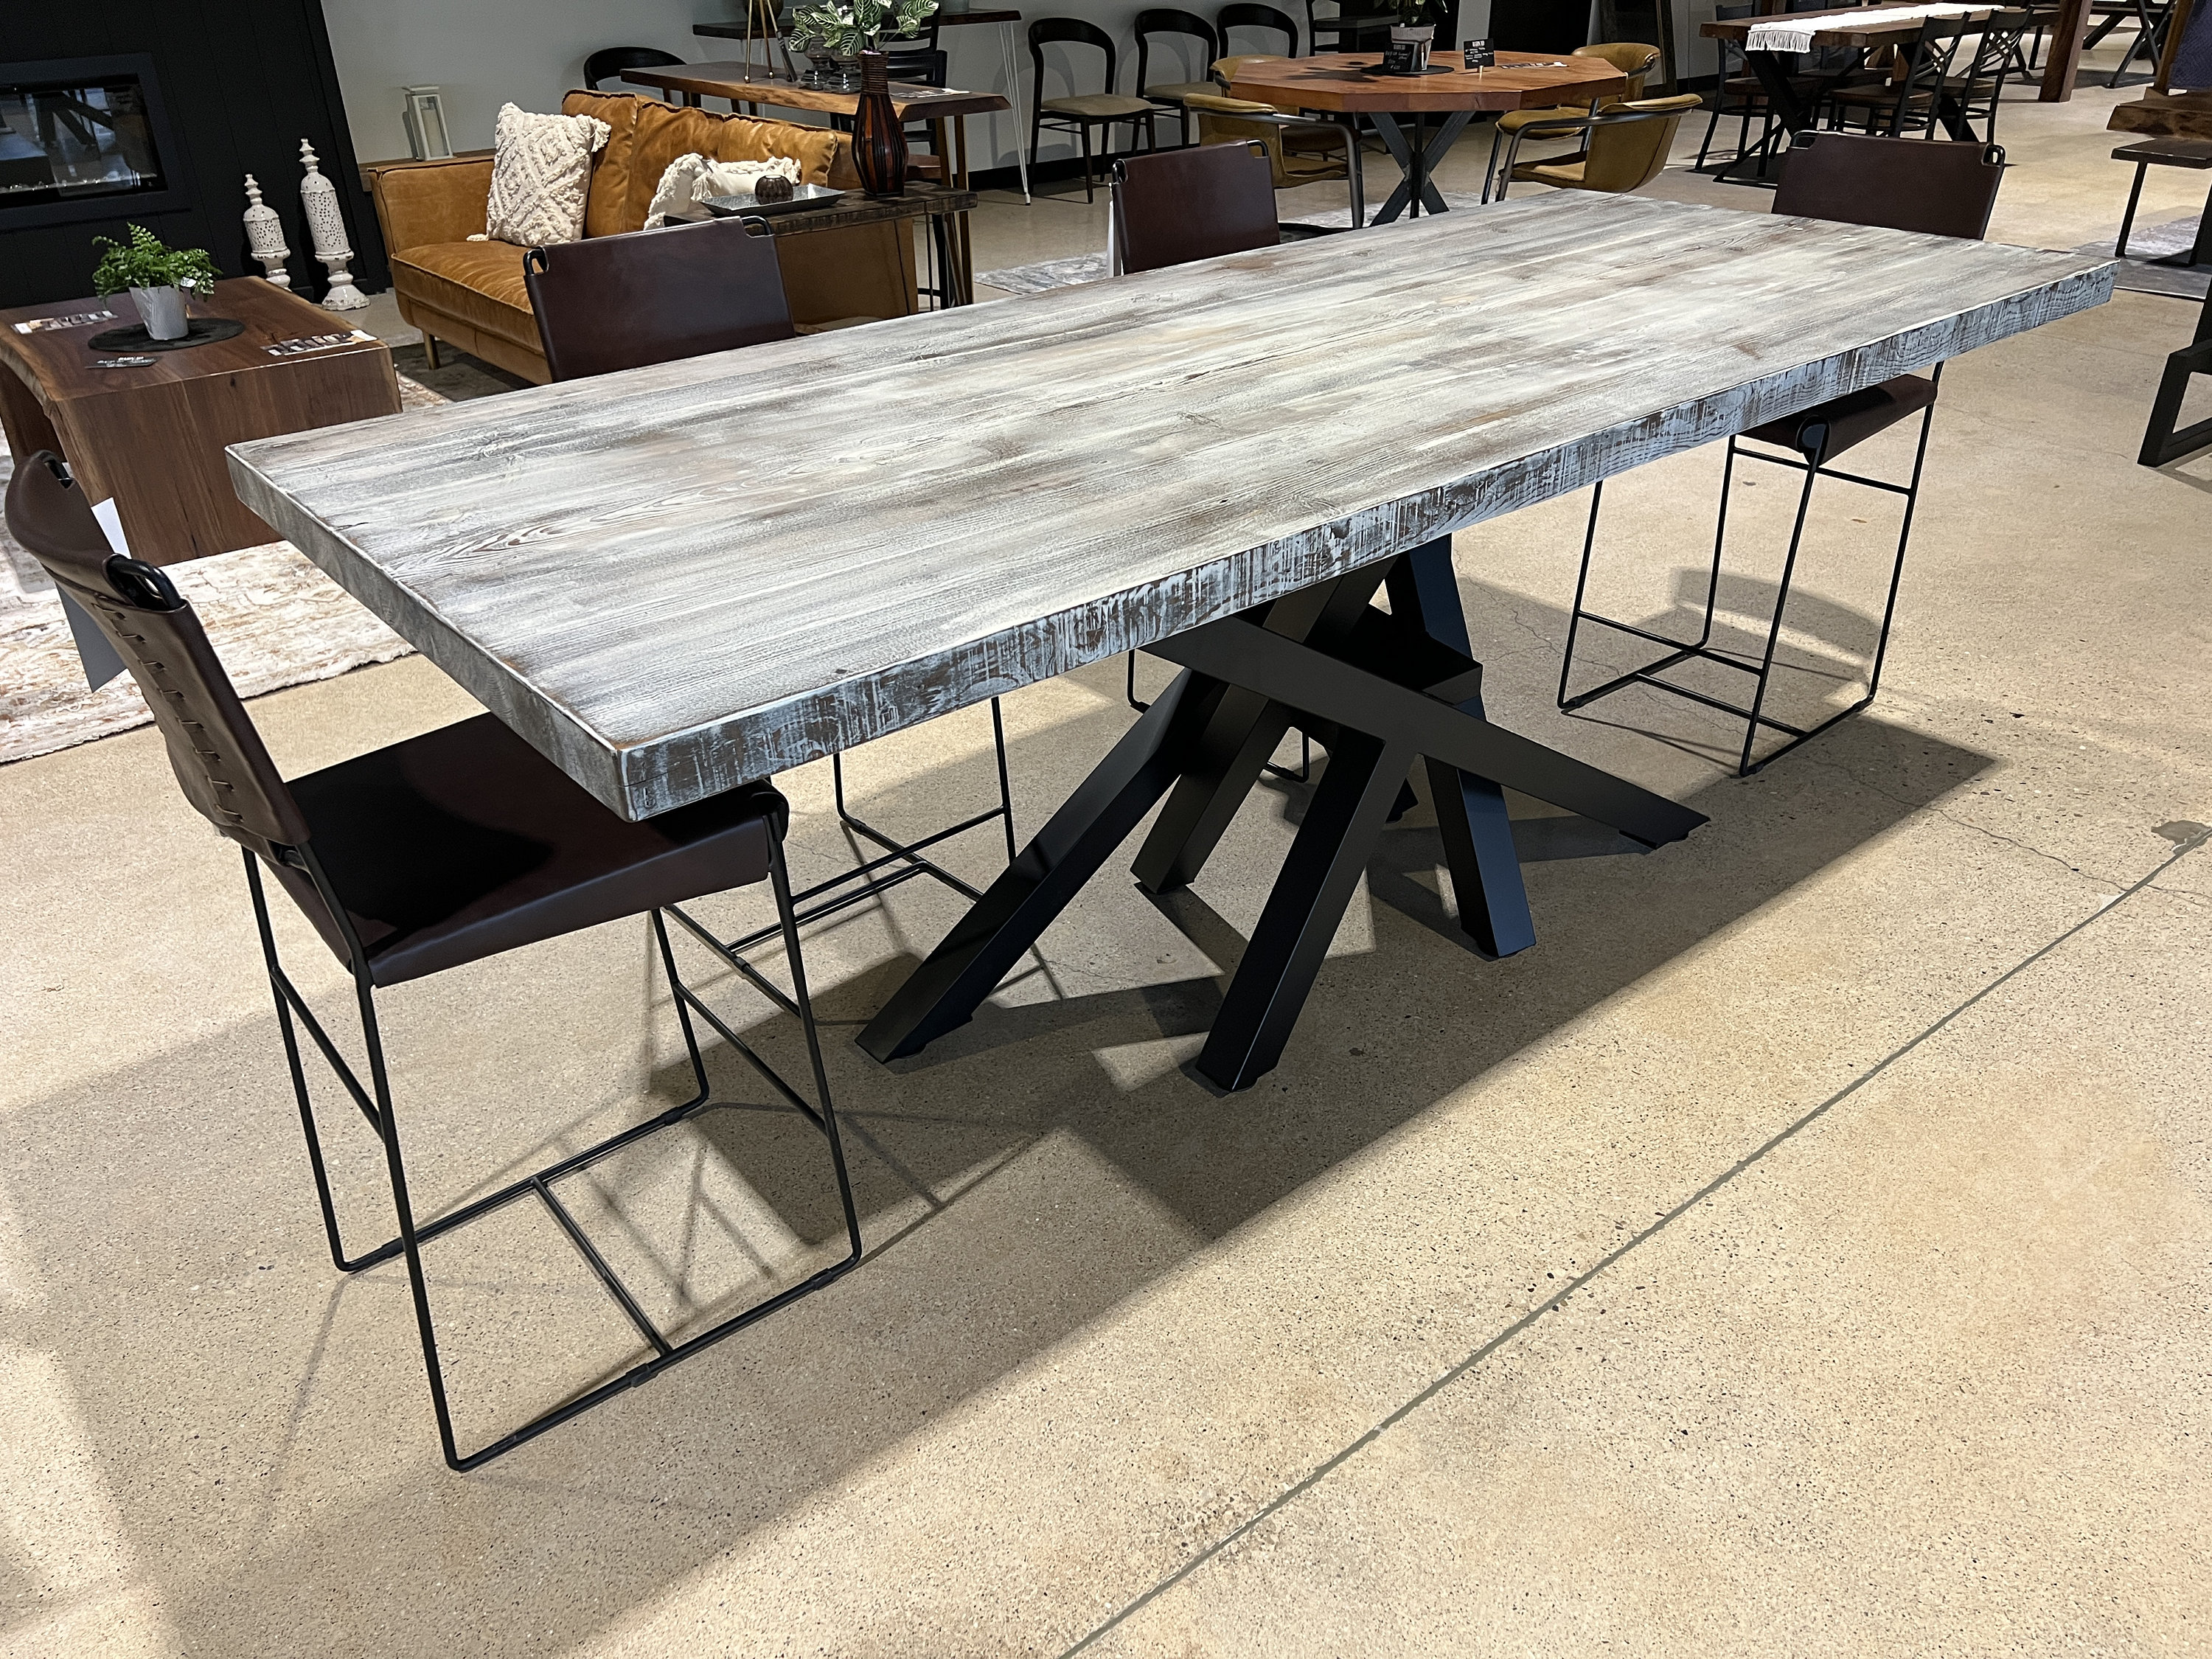 8 Ft 95 X 39 243 Cm X 100 Cm HDPE Pourfection Mold Epoxy Huge Big Dinning  Table Mould by 3,4 Ft in Woodworker Gift Casting Large River 